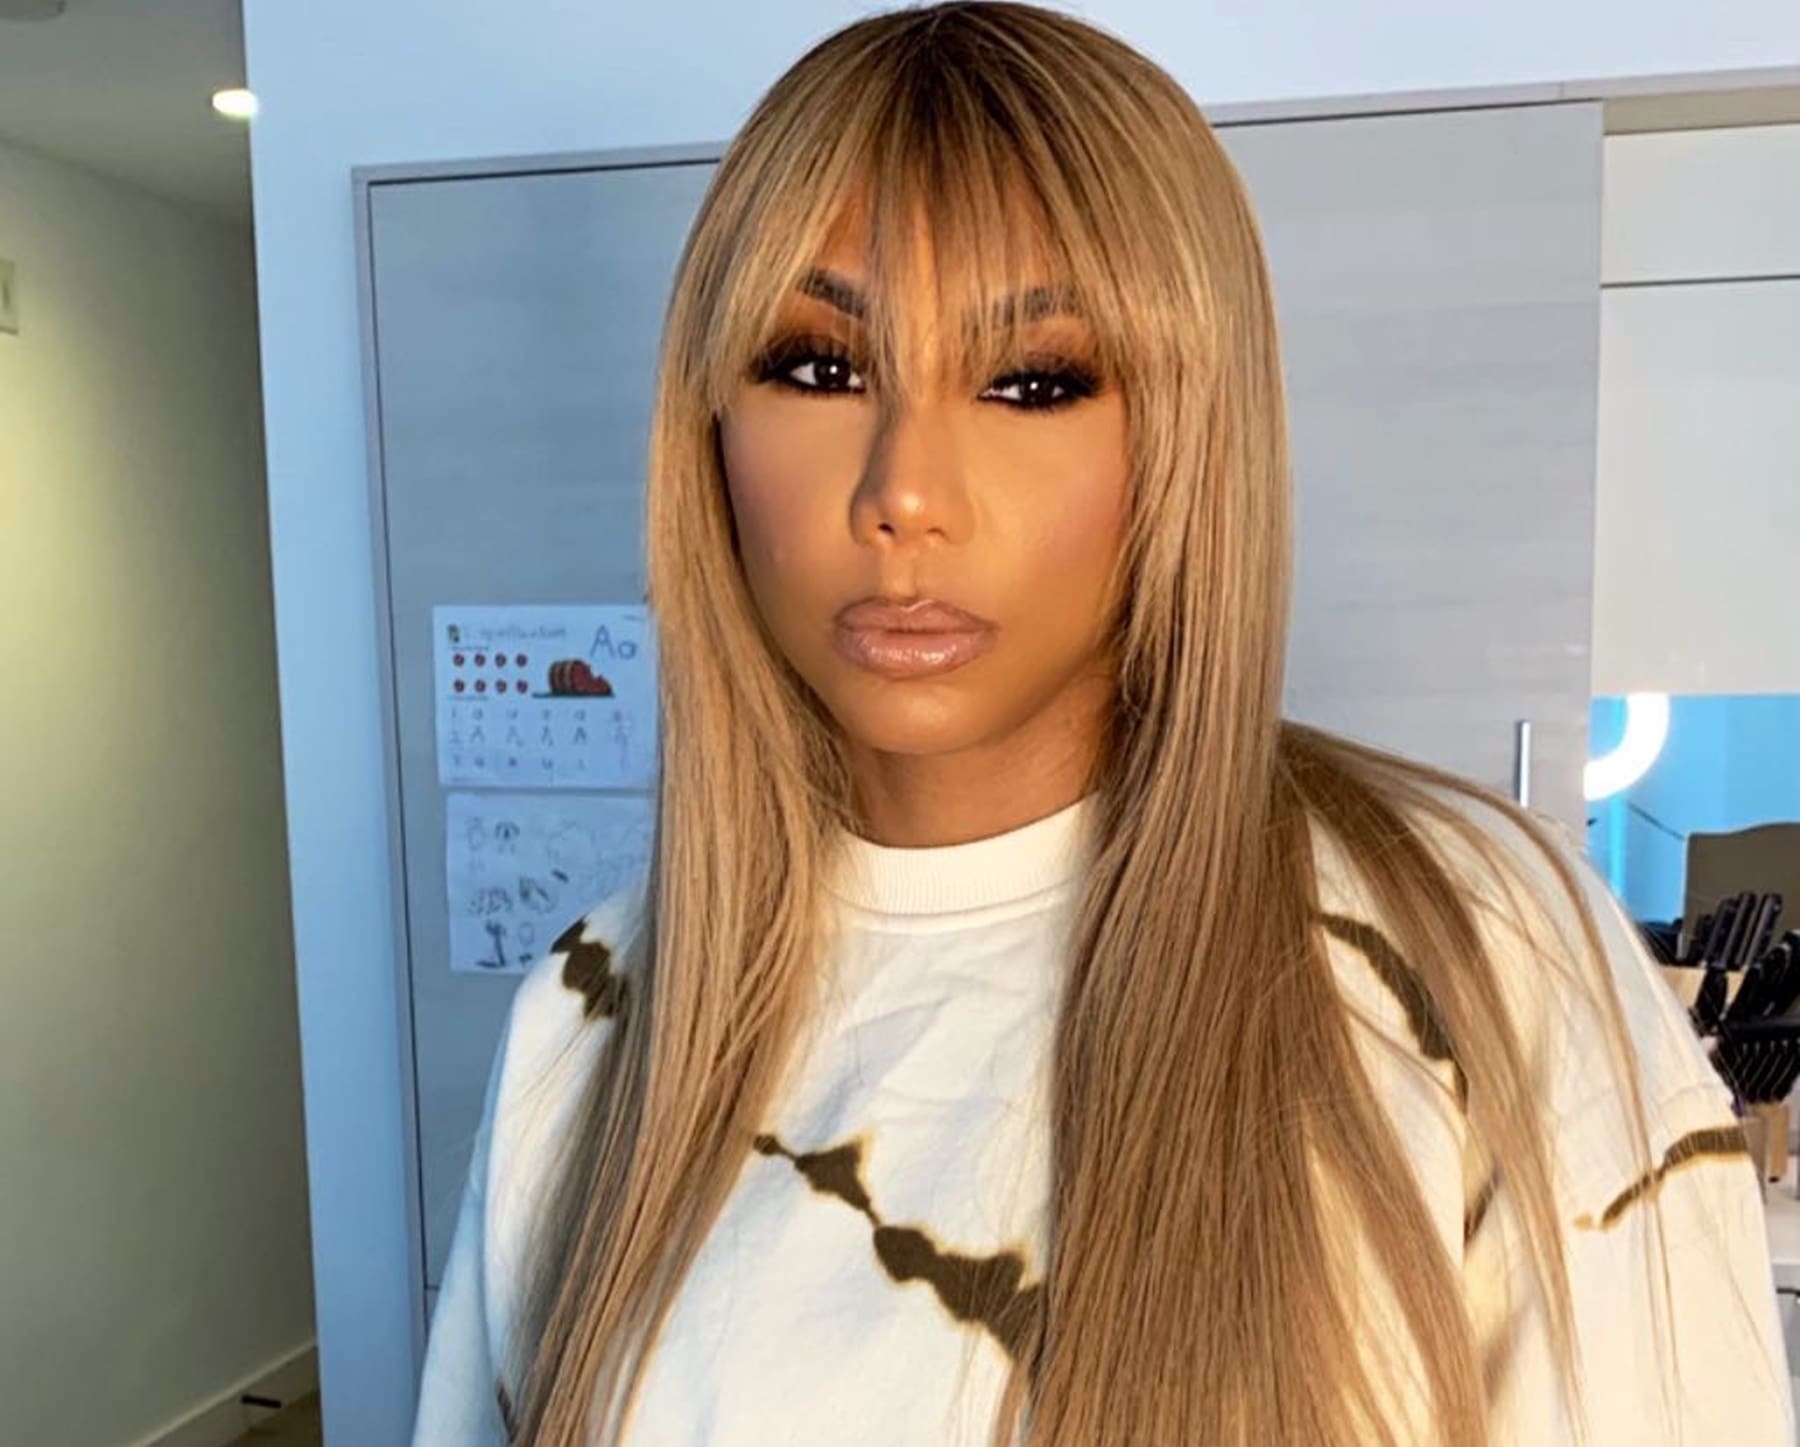 Tamar Braxton Twerks In Front Of The Camera And People Understand Why David Adefeso Is So In Love With Her